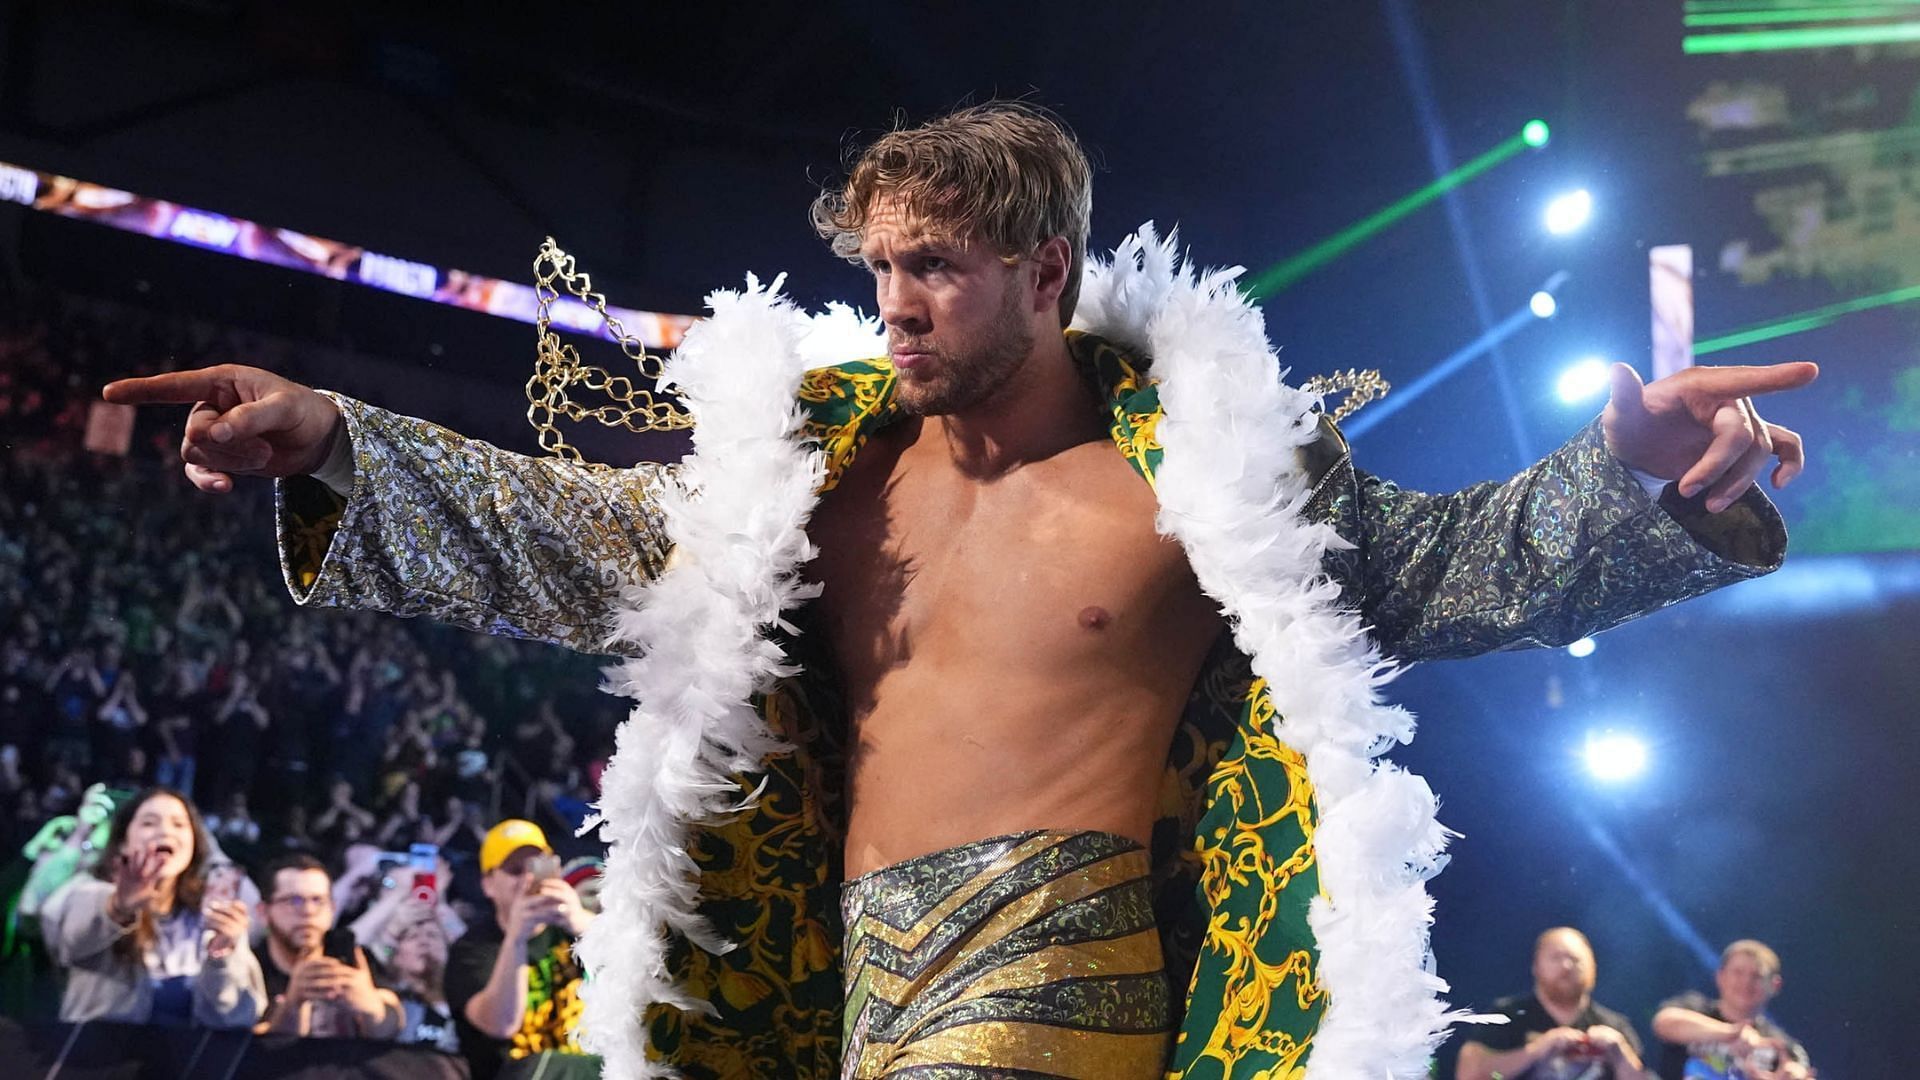 Will Ospreay is one of the faces of All Elite Wrestling [Photo courtesy of A